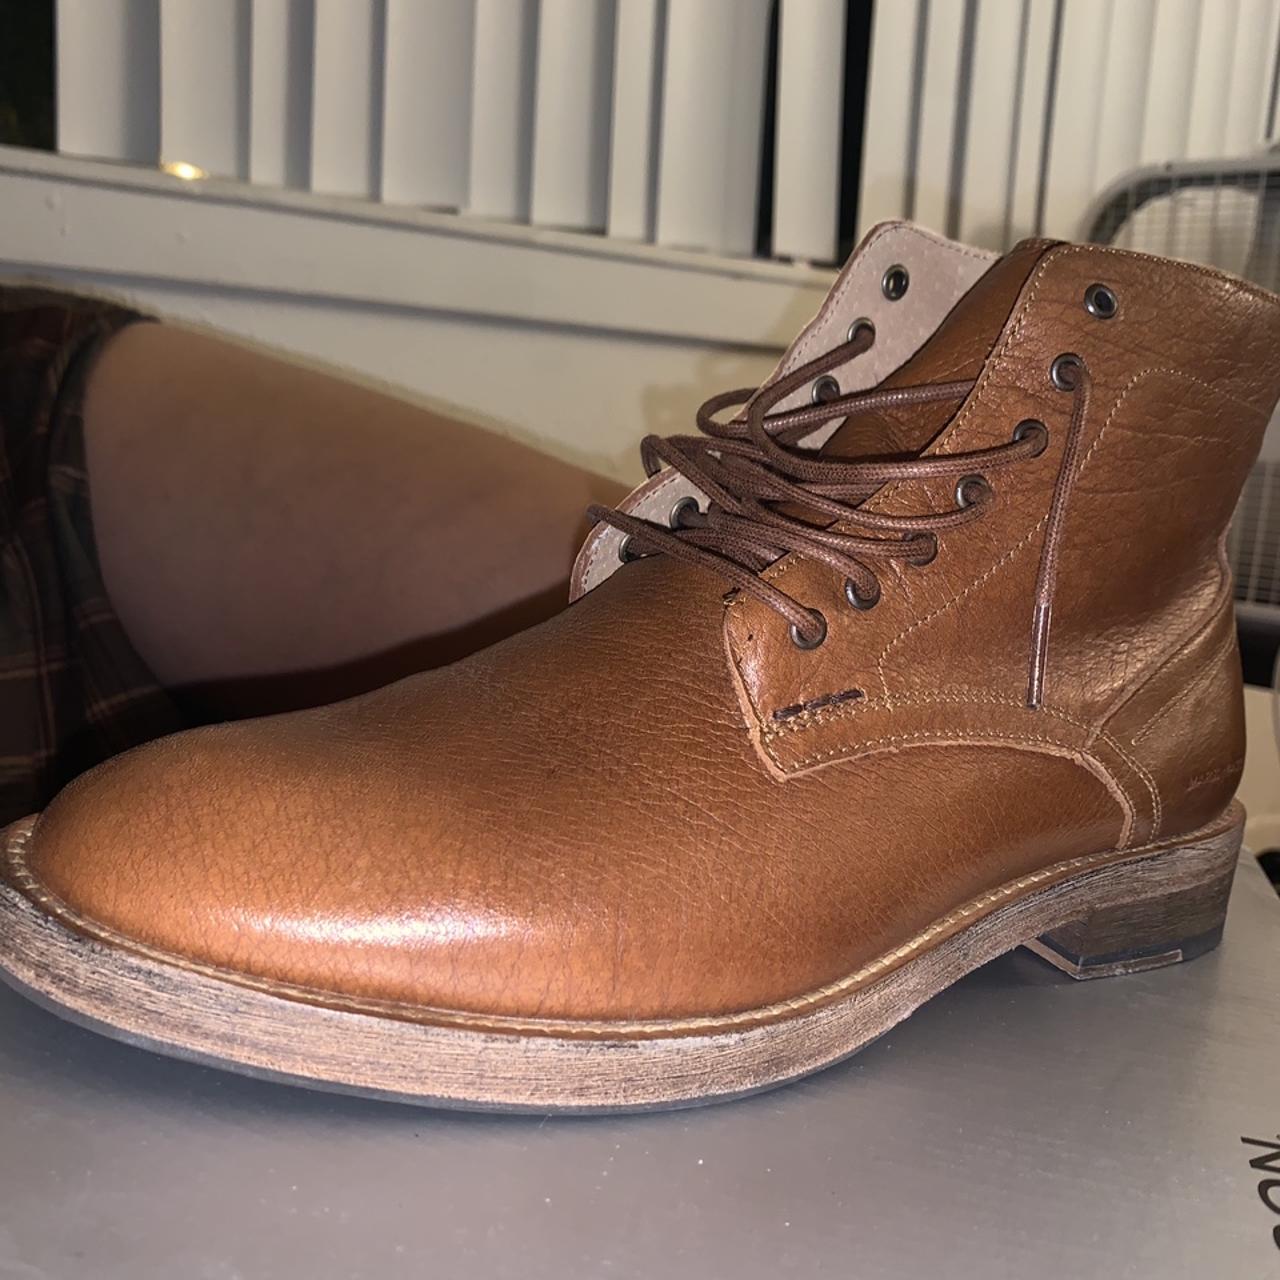 Men's Tan and Brown Boots (3)